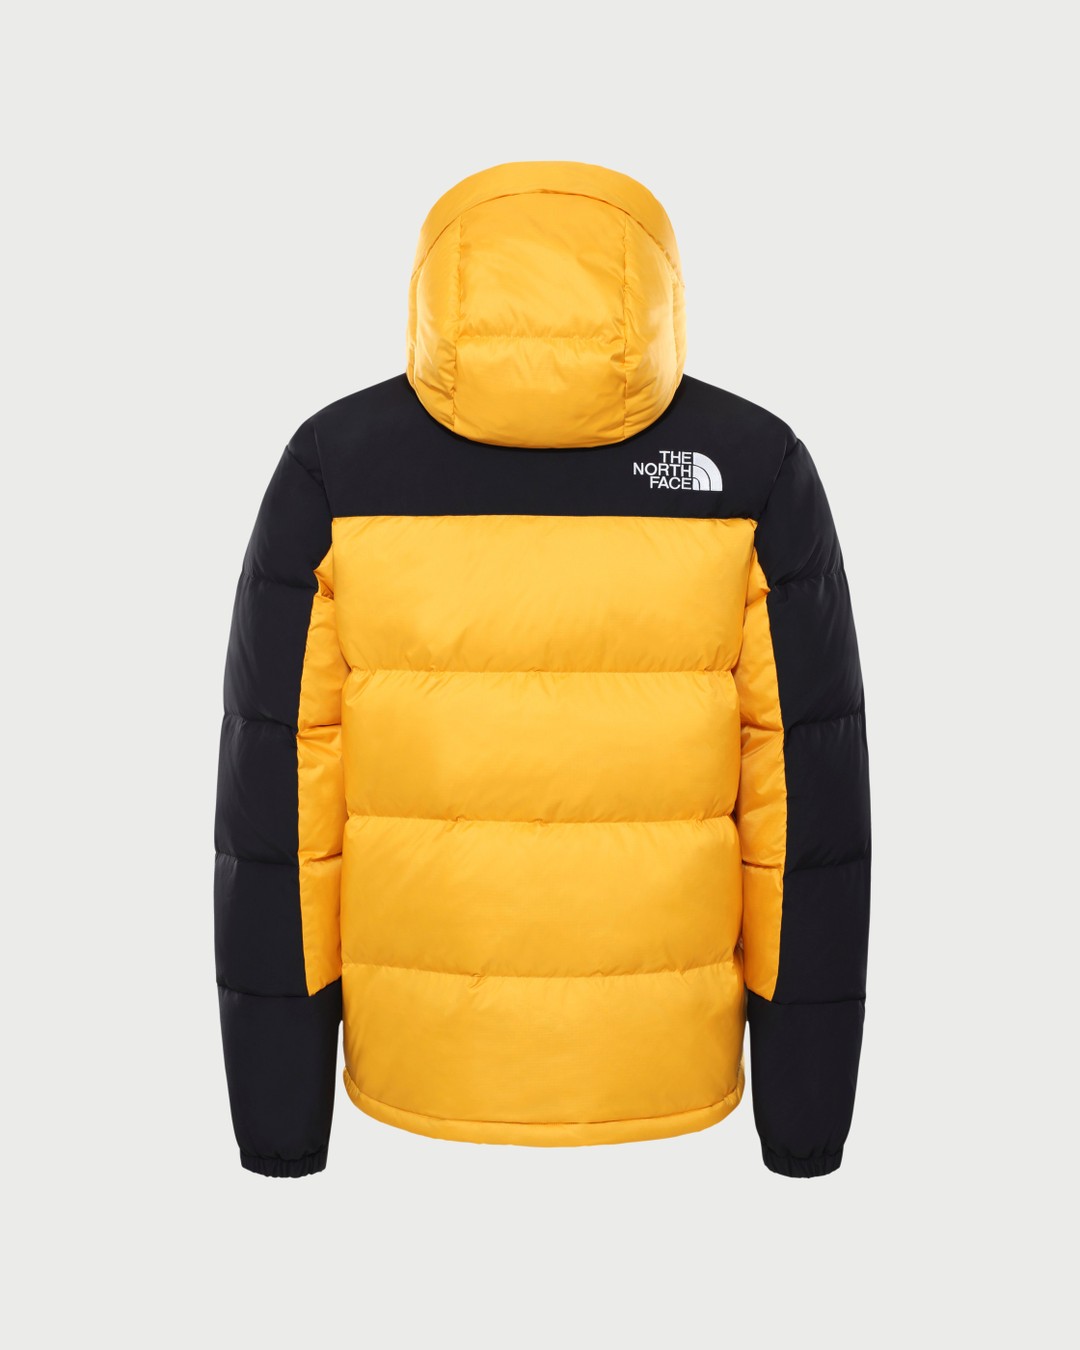 The North Face – Himalayan Down Jacket Peak Summit Gold Unisex - Down Jackets - Yellow - Image 2